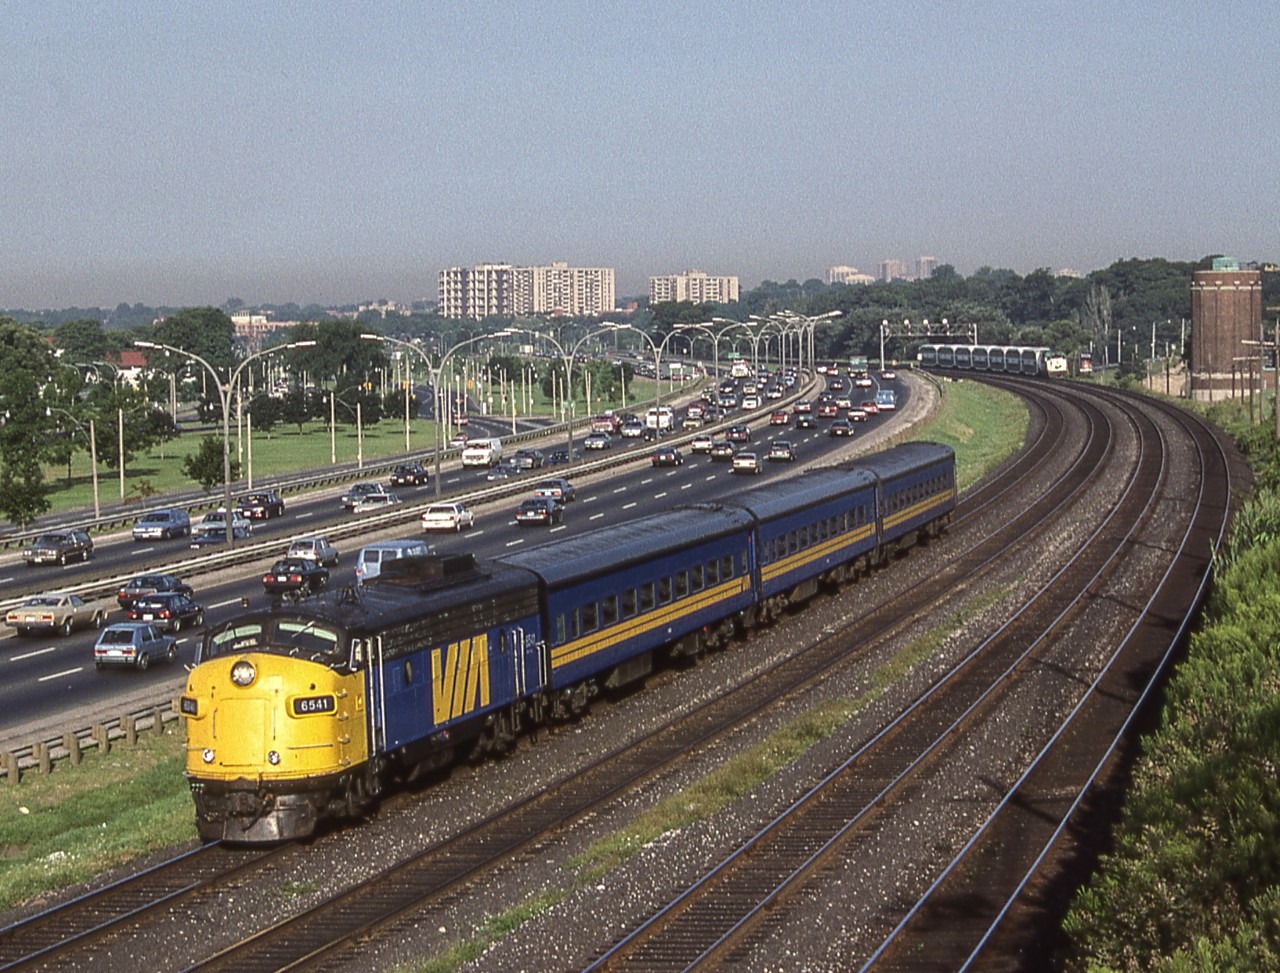 VIA 6541 is in Toronto heading east to Toronto Union Station on August 9, 1987. In the background under the signal bridge is a GO train.